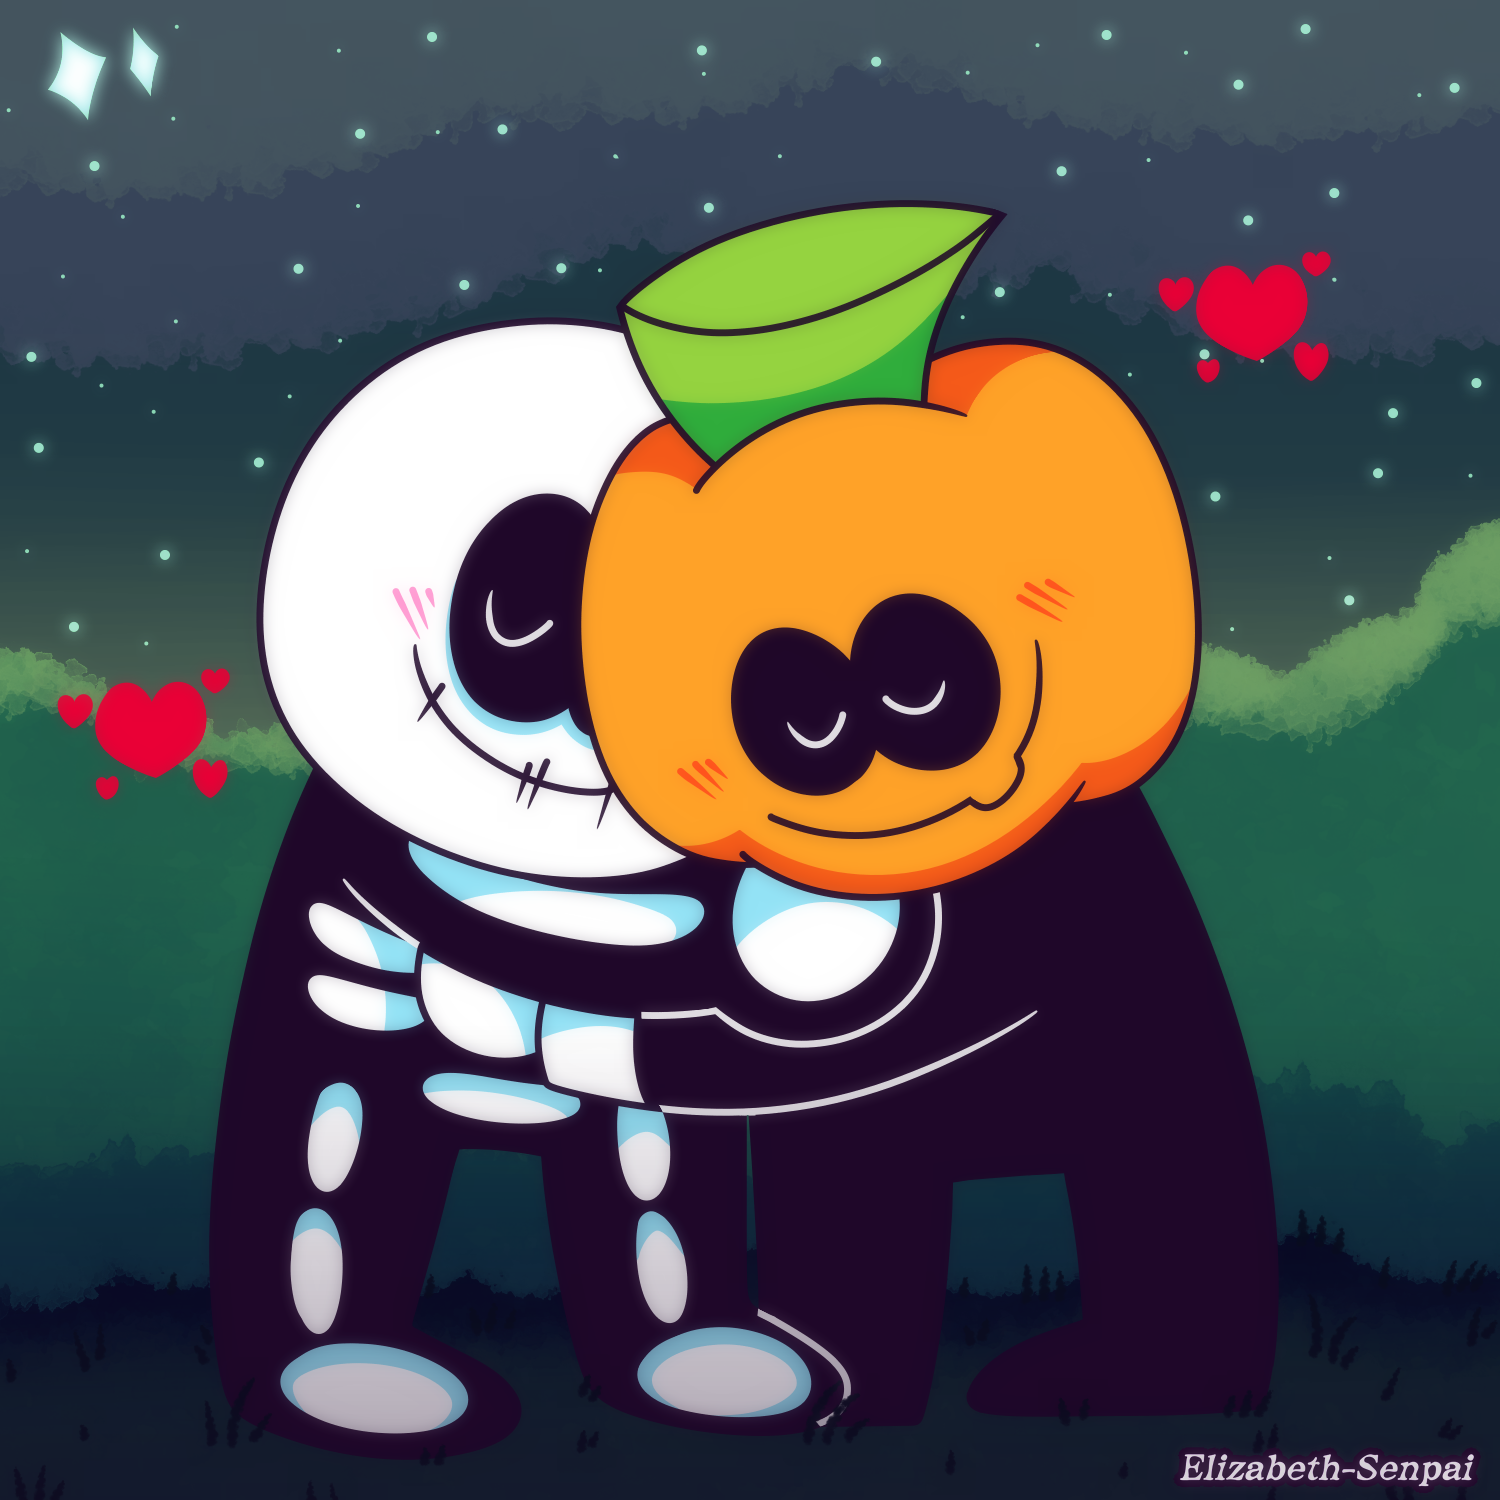 skid and pump doing the spooky month dance  Don't hug me i'm scared  fanart, Cute drawings, Baby animals super cute